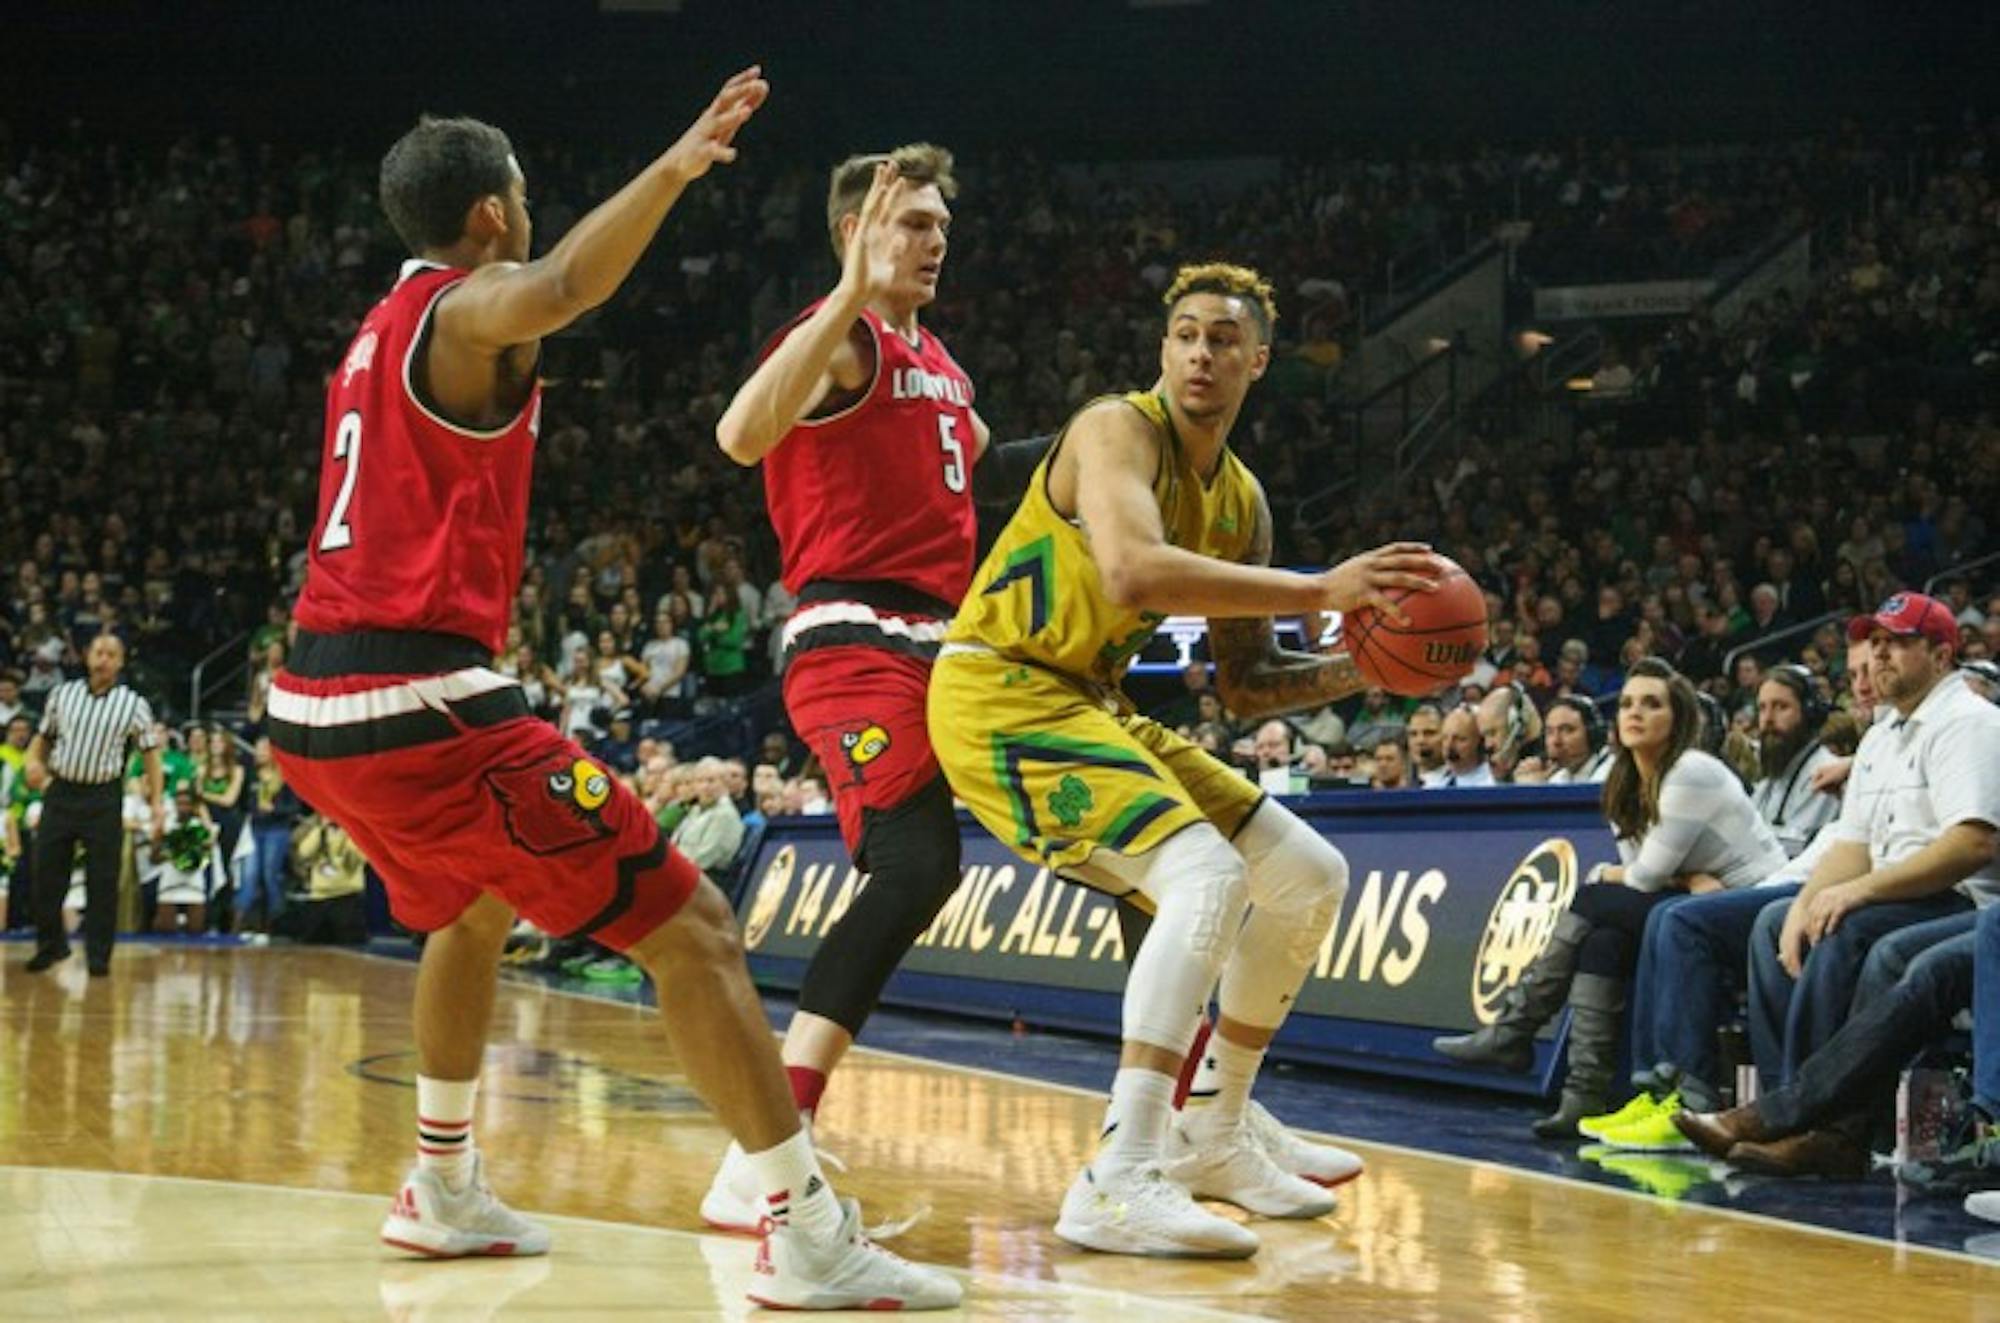 Irish senior forward Zach Auguste looks for an open teammate during Notre Dame’s 71-66 win over Louisville on Feb. 13 at Purcell Pavilion. Auguste is questionable for Wednesday with a knee injury.